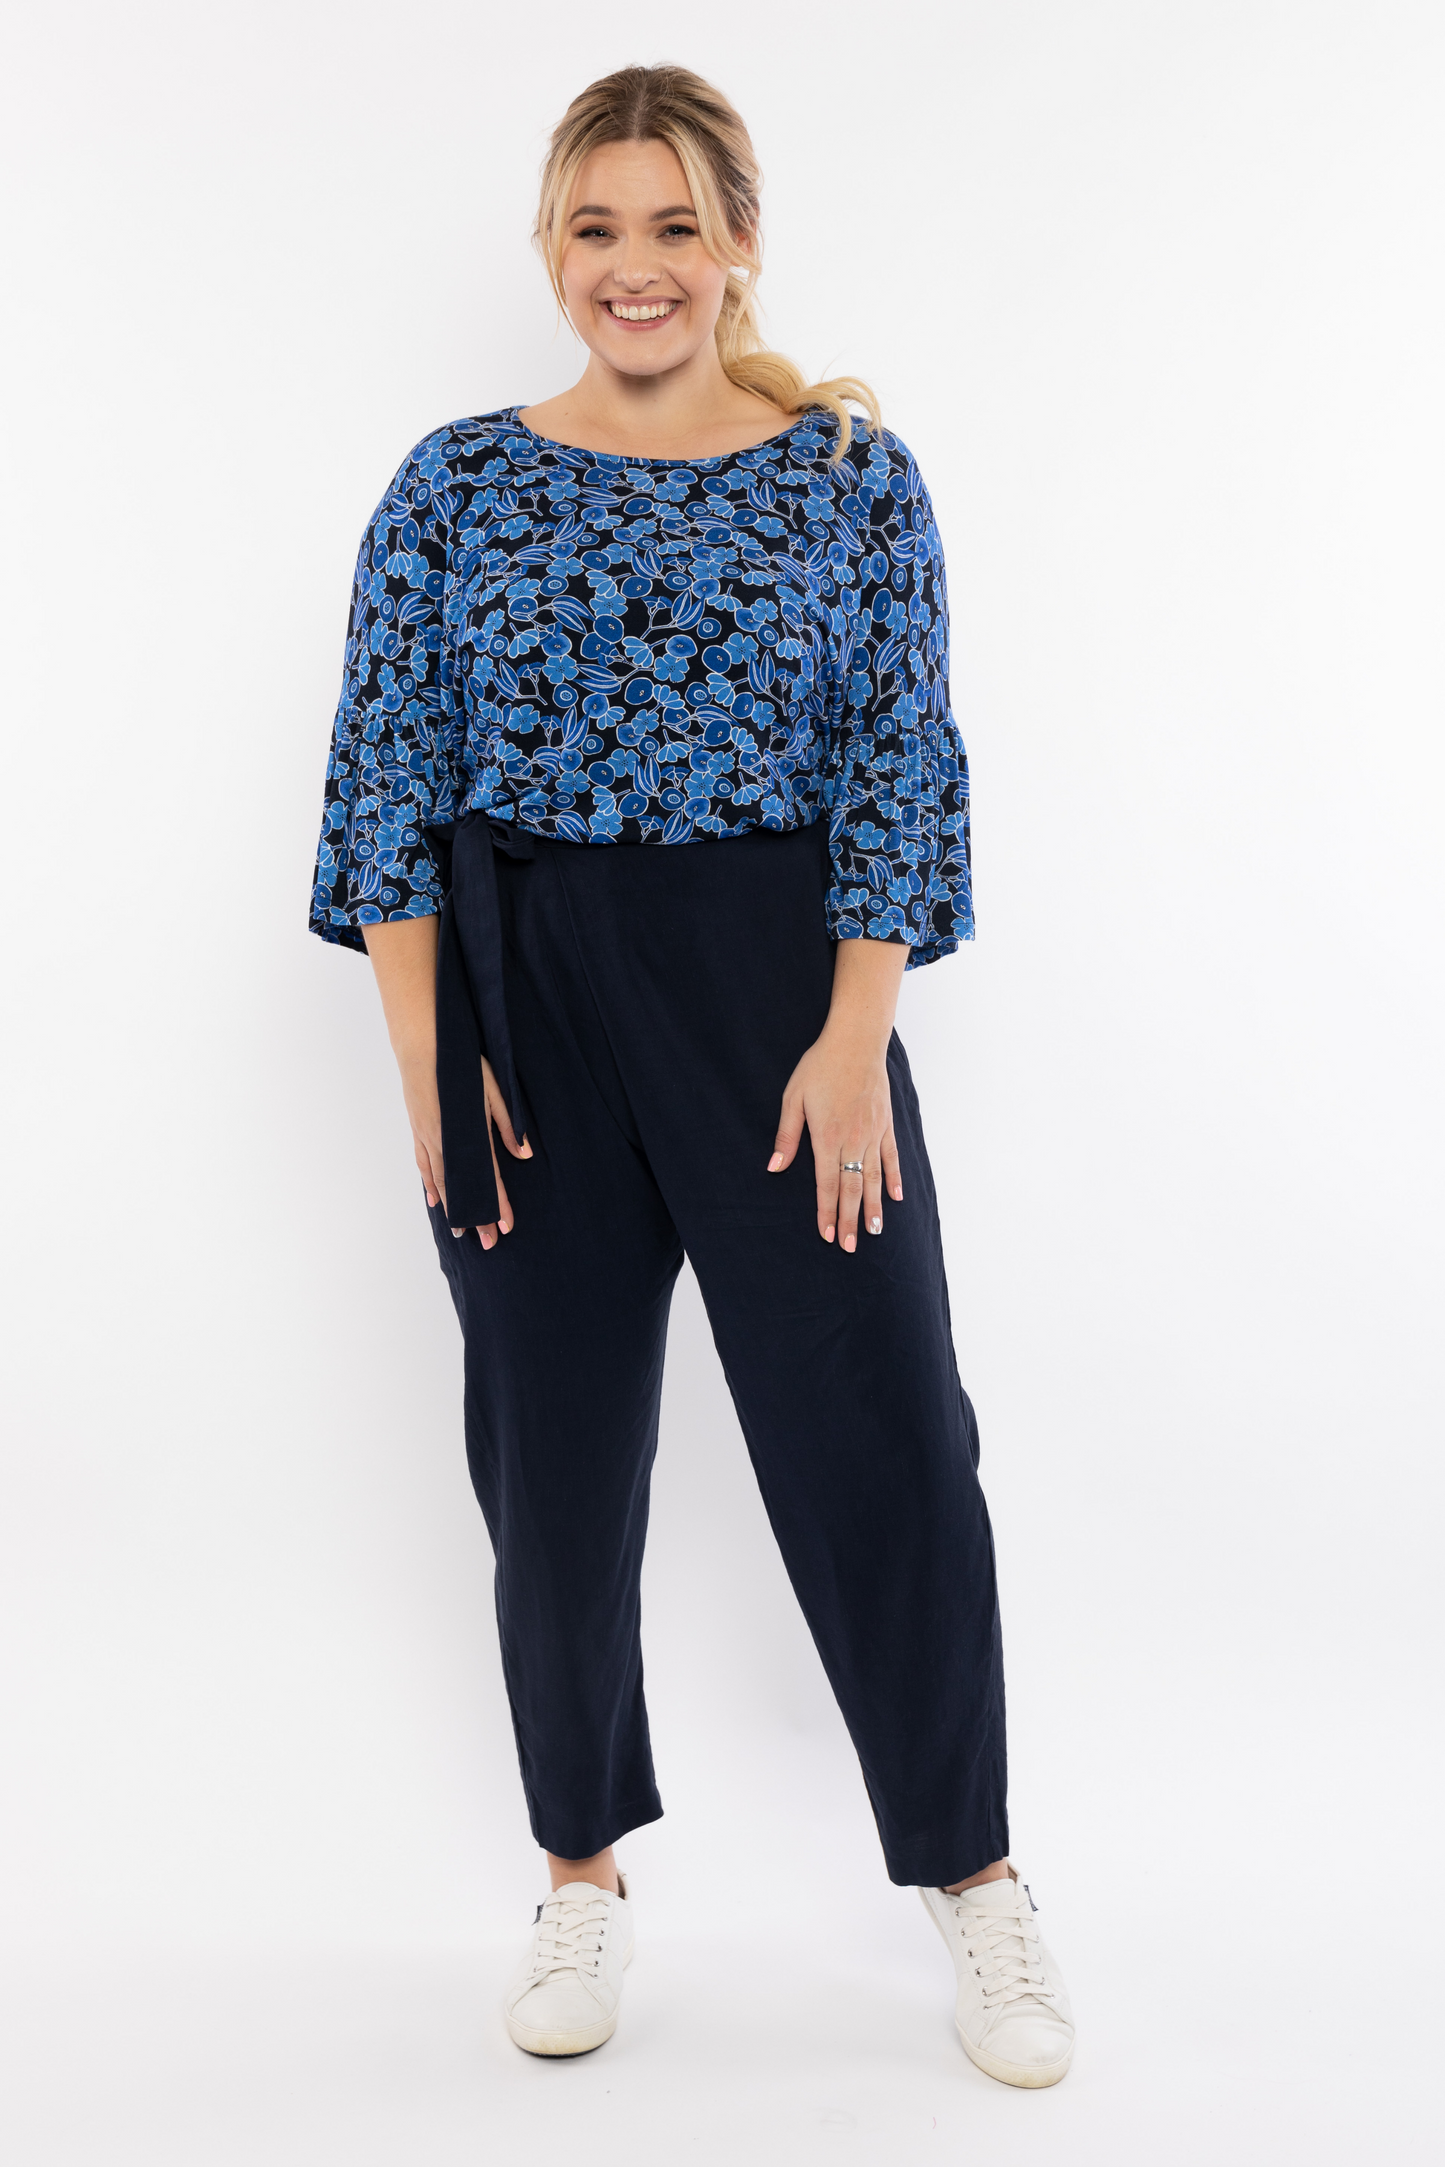 Melody Pleat Pant in Navy